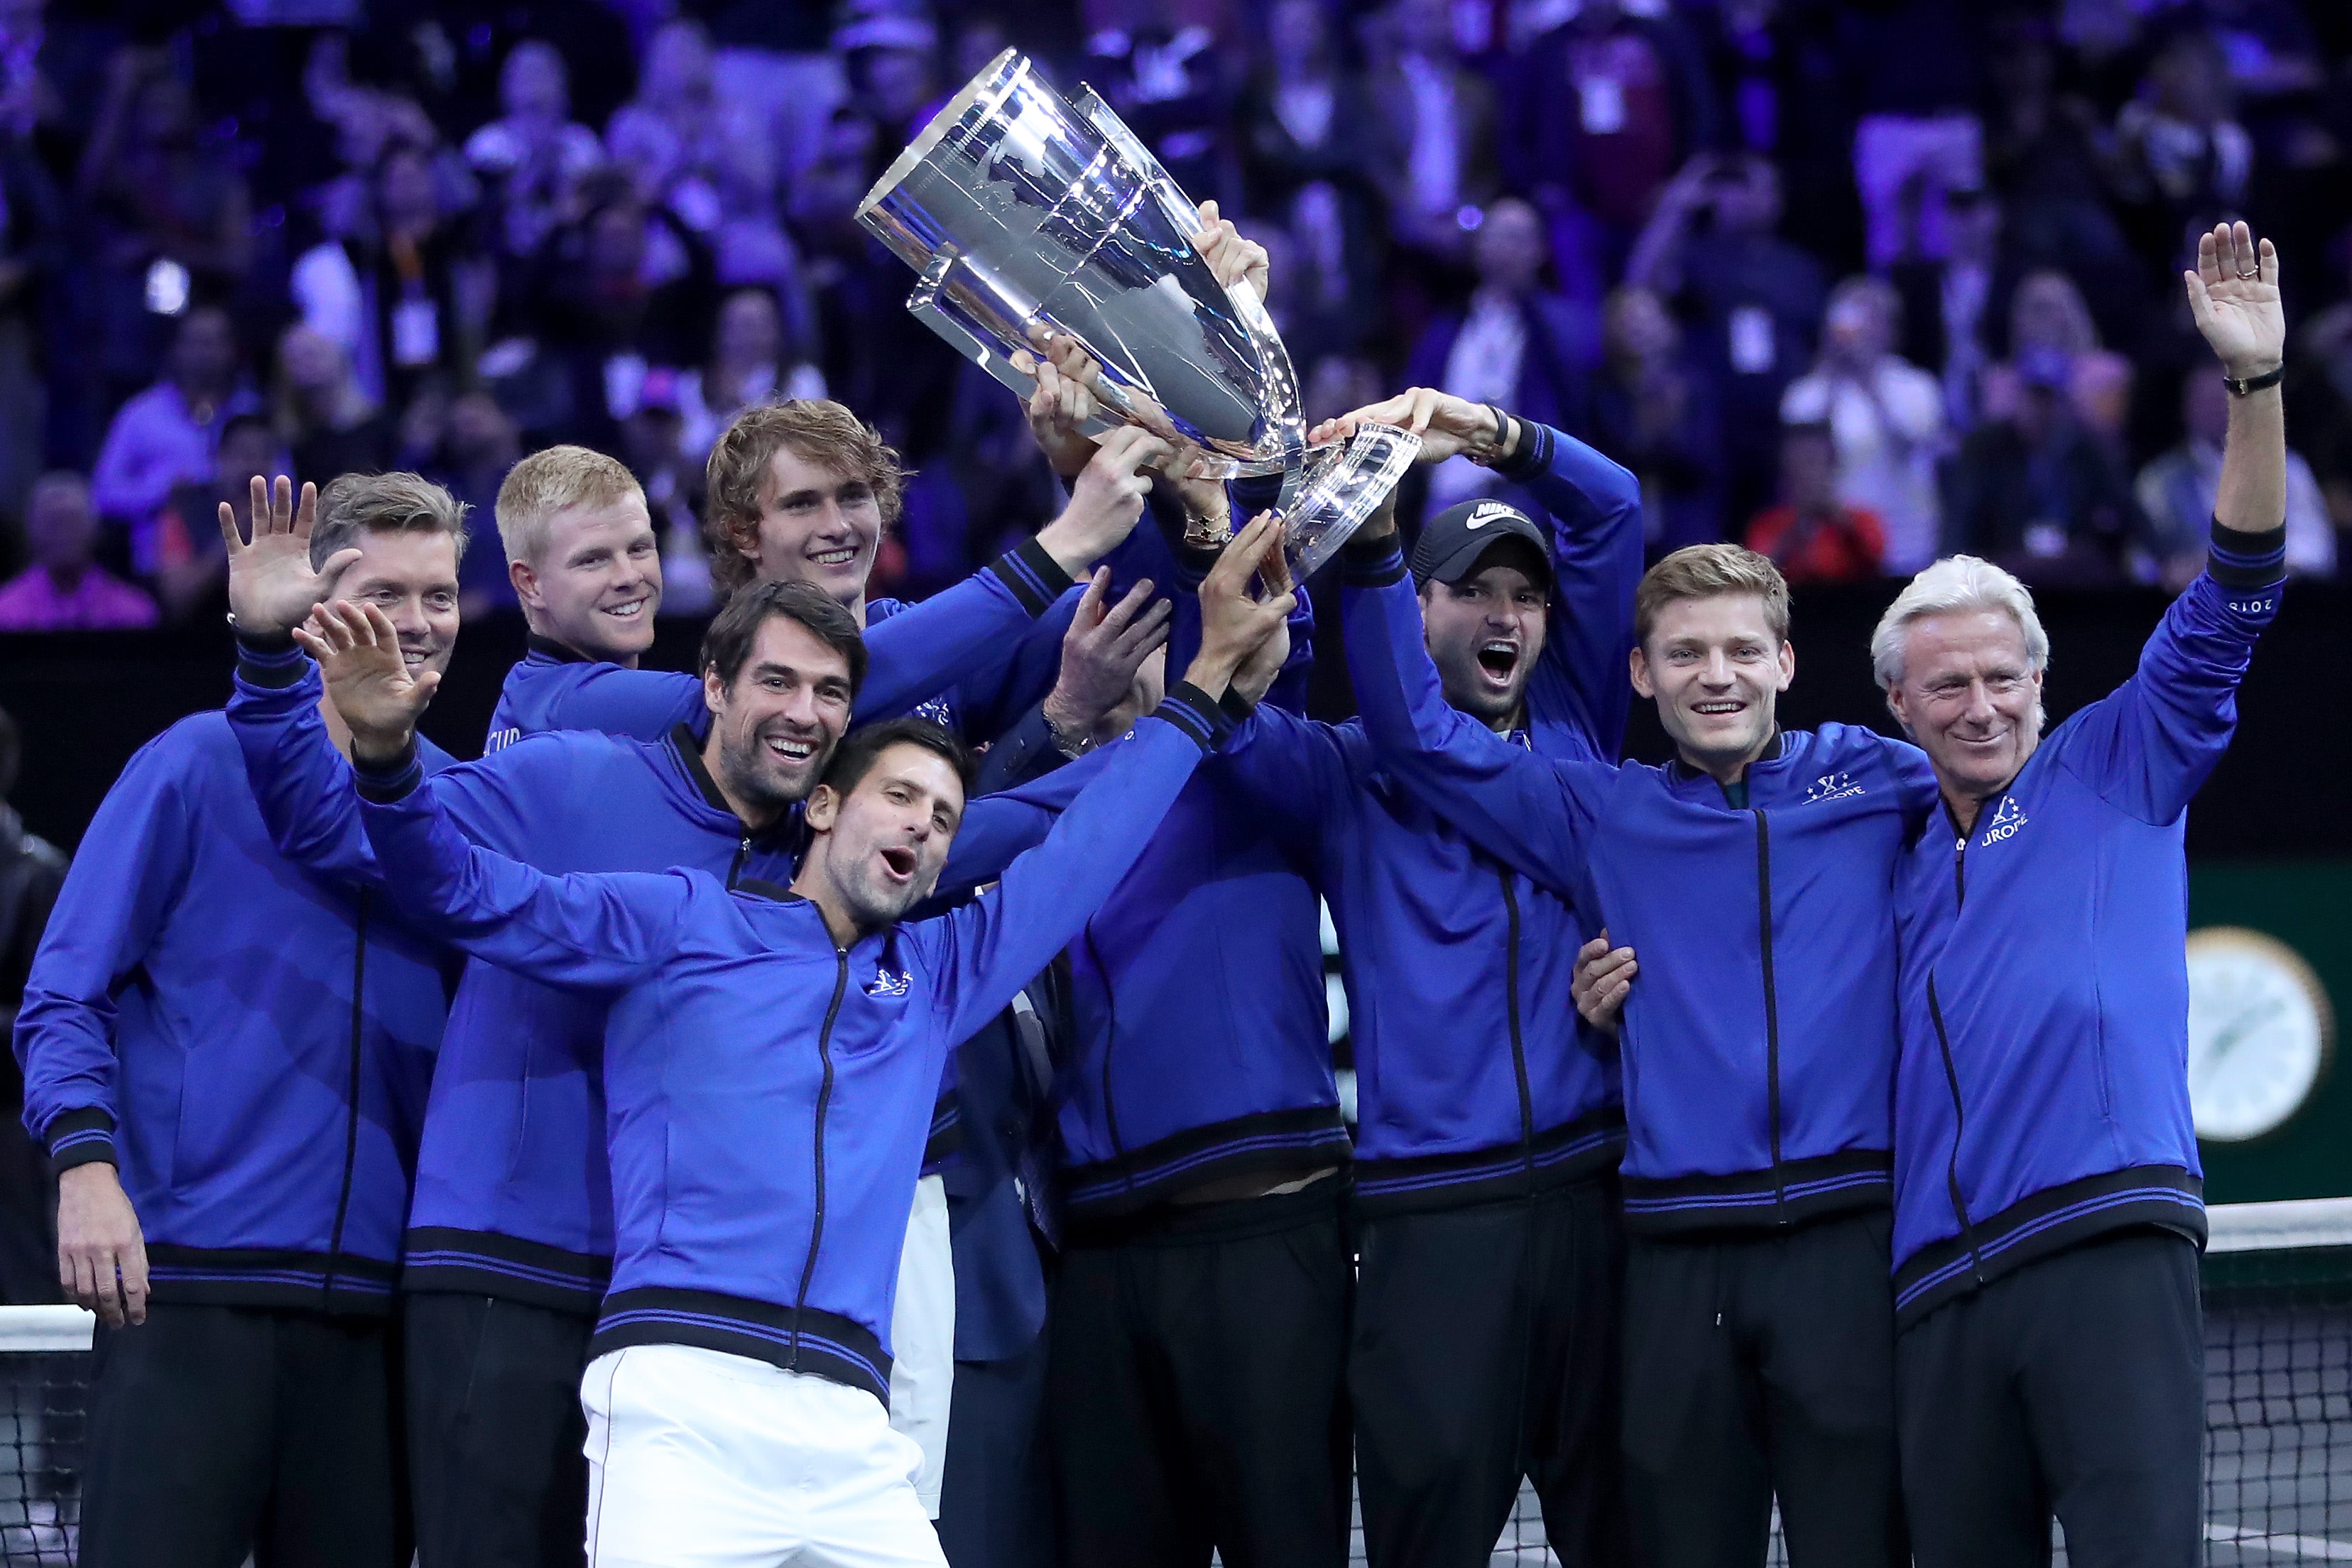 Laver Cup A solution to tennis' getitdone program